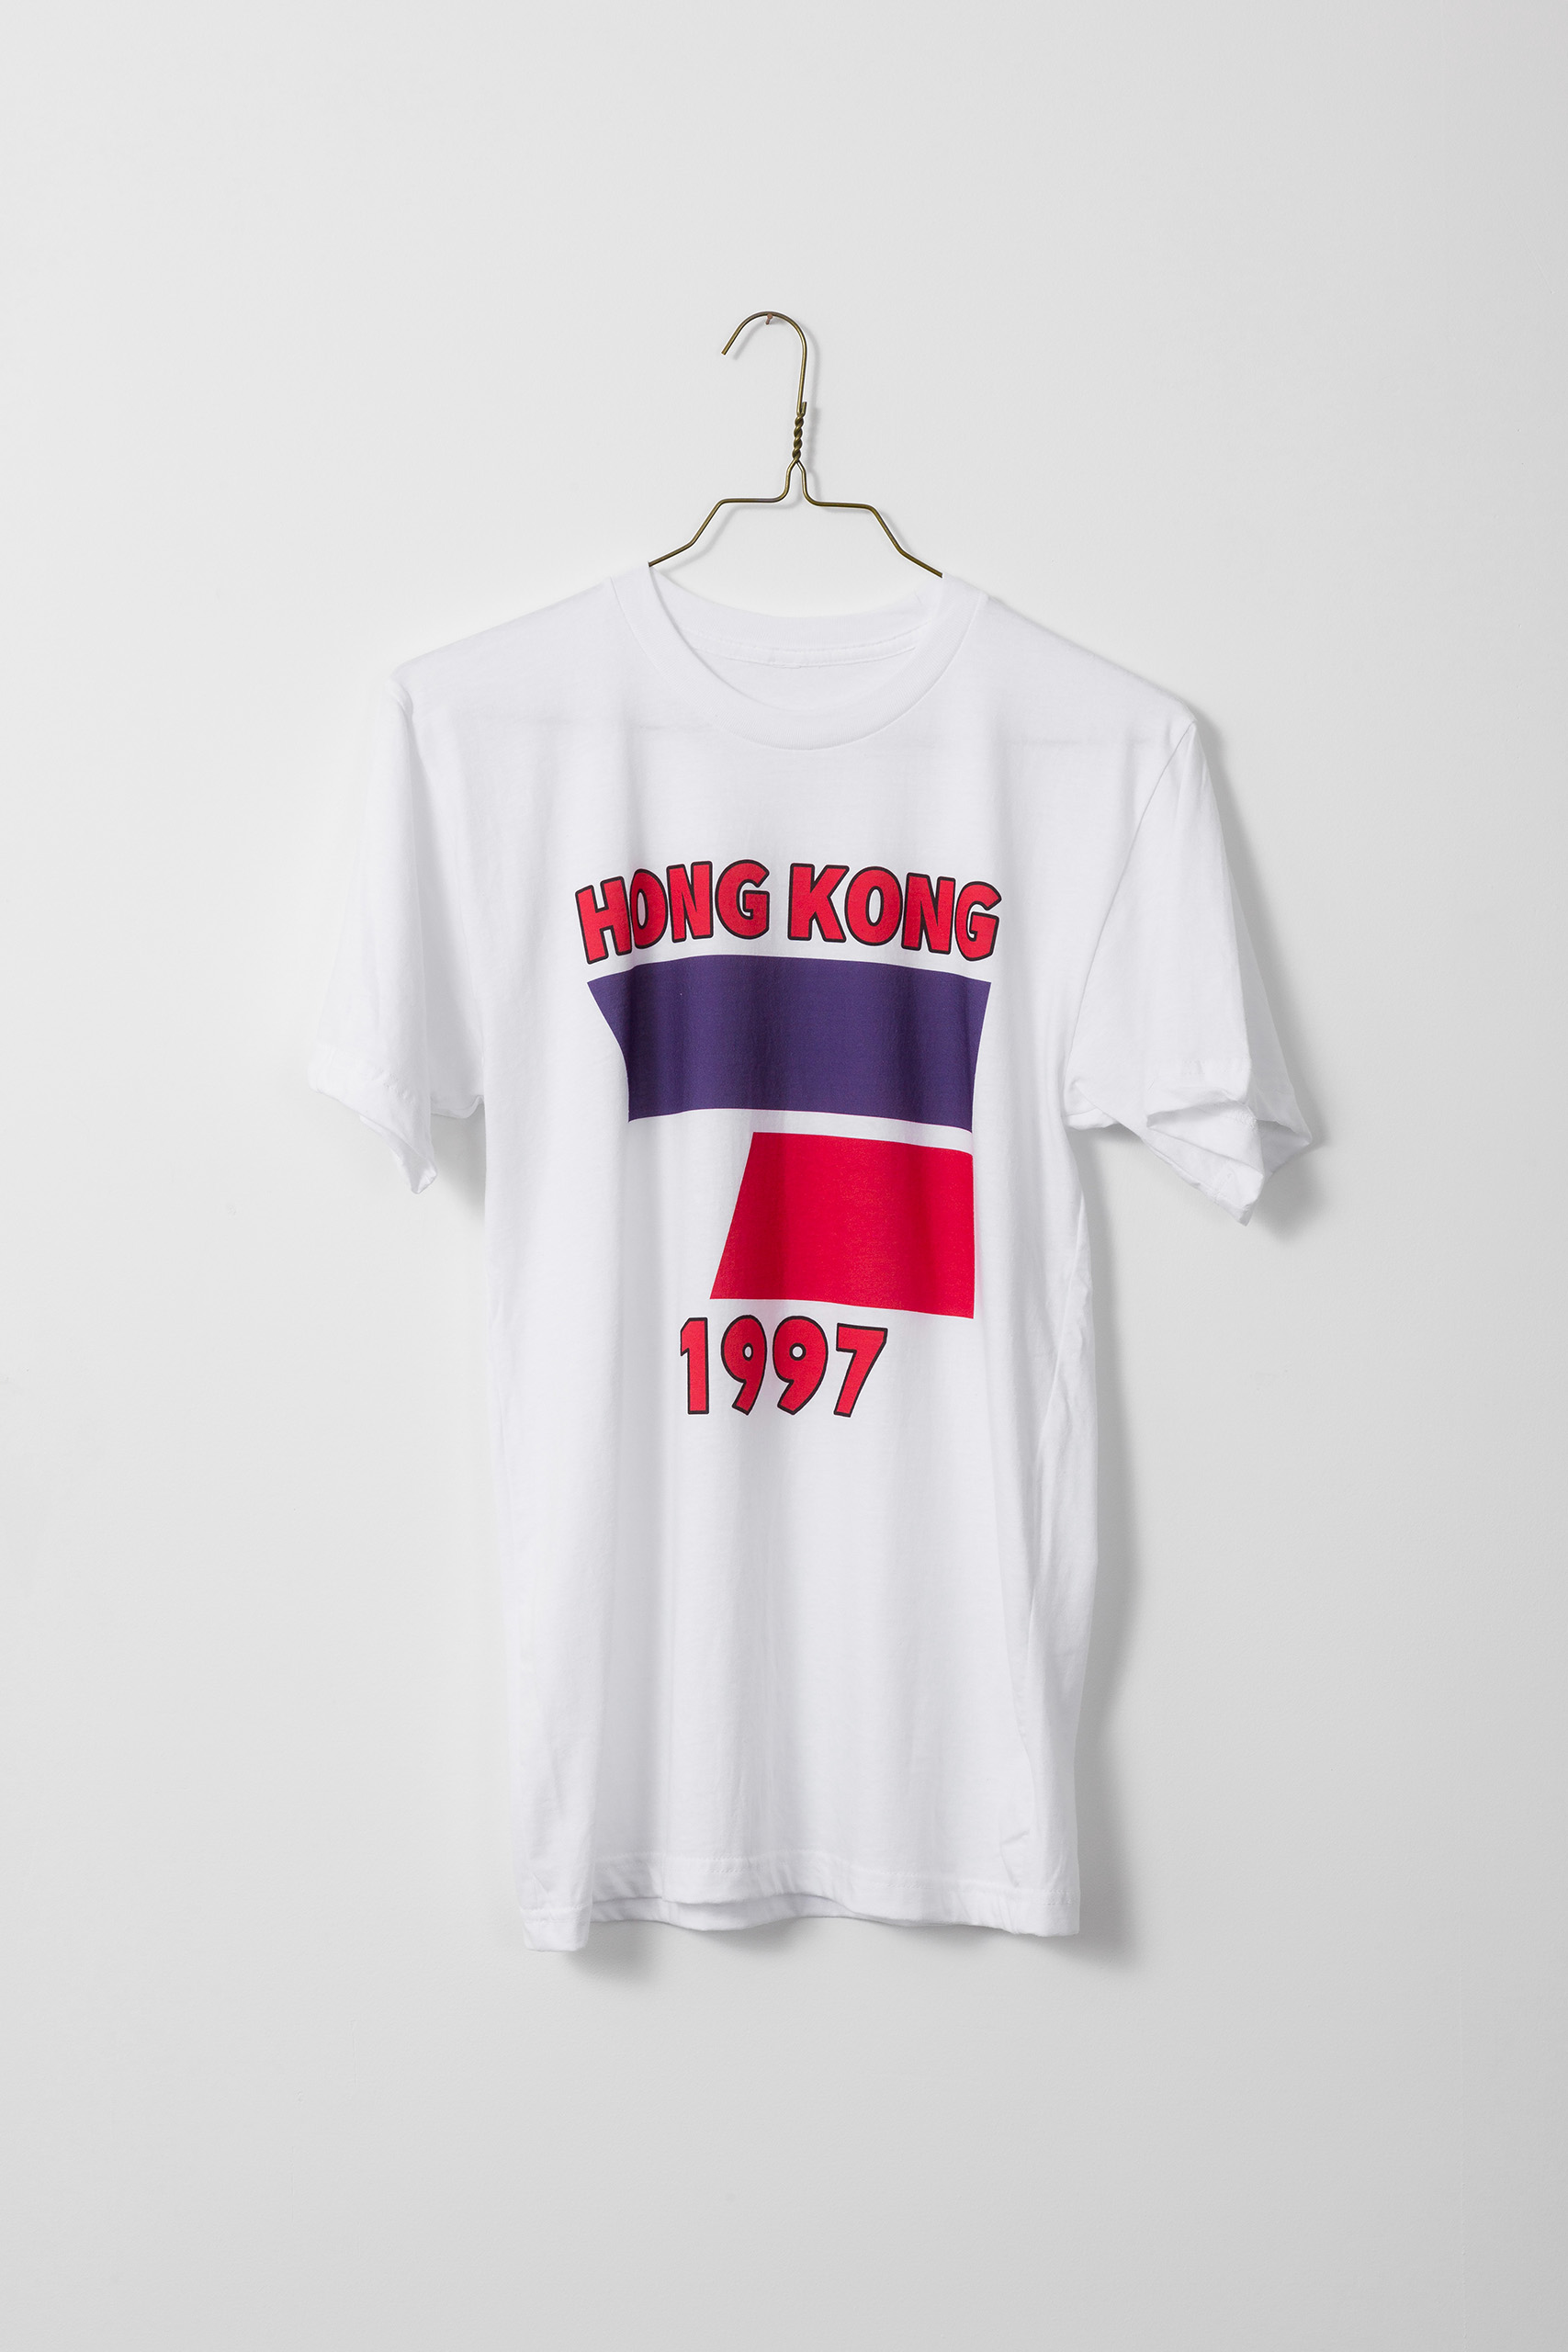 White t-shirt with blue and red flag and the words "HONG KONG" above and "1997" below